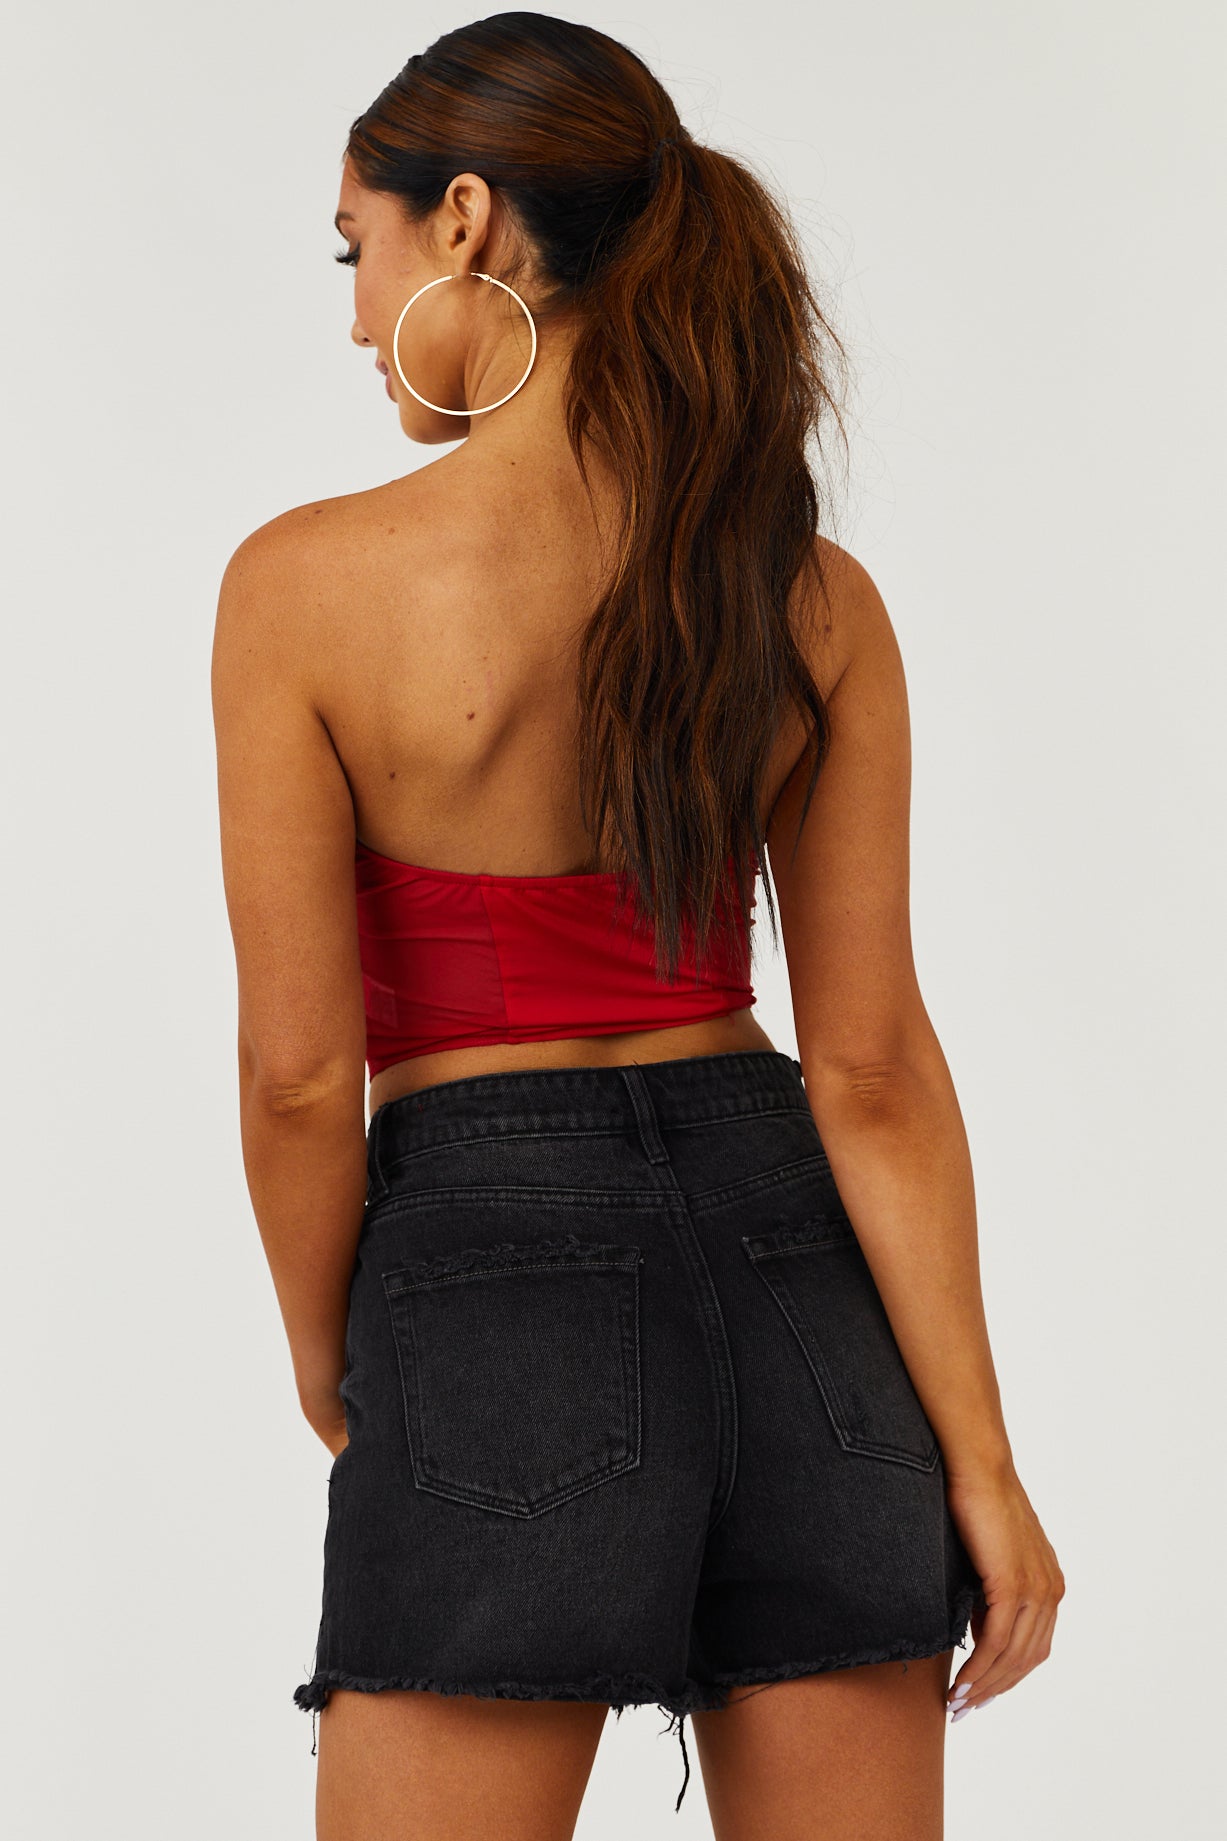 Forever 21 Women's Hook-and-Eye Corset Crop Top in Fiery Red Small